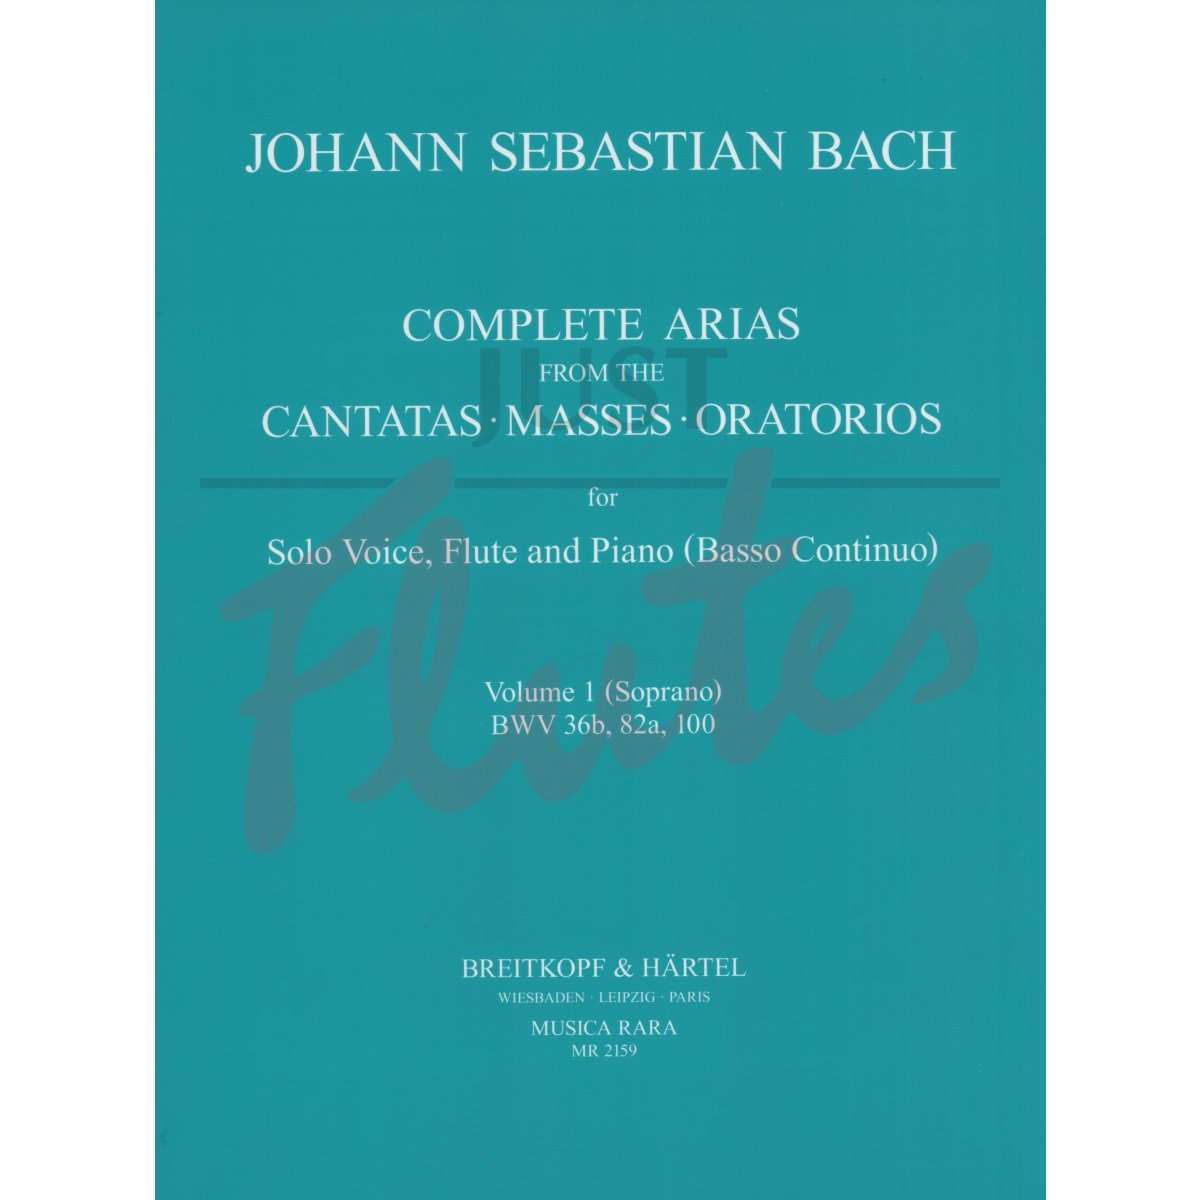 Complete Arias from the Cantatas, Masses &amp; Oratorios for Solo Voice, Flute and Piano/Continuo